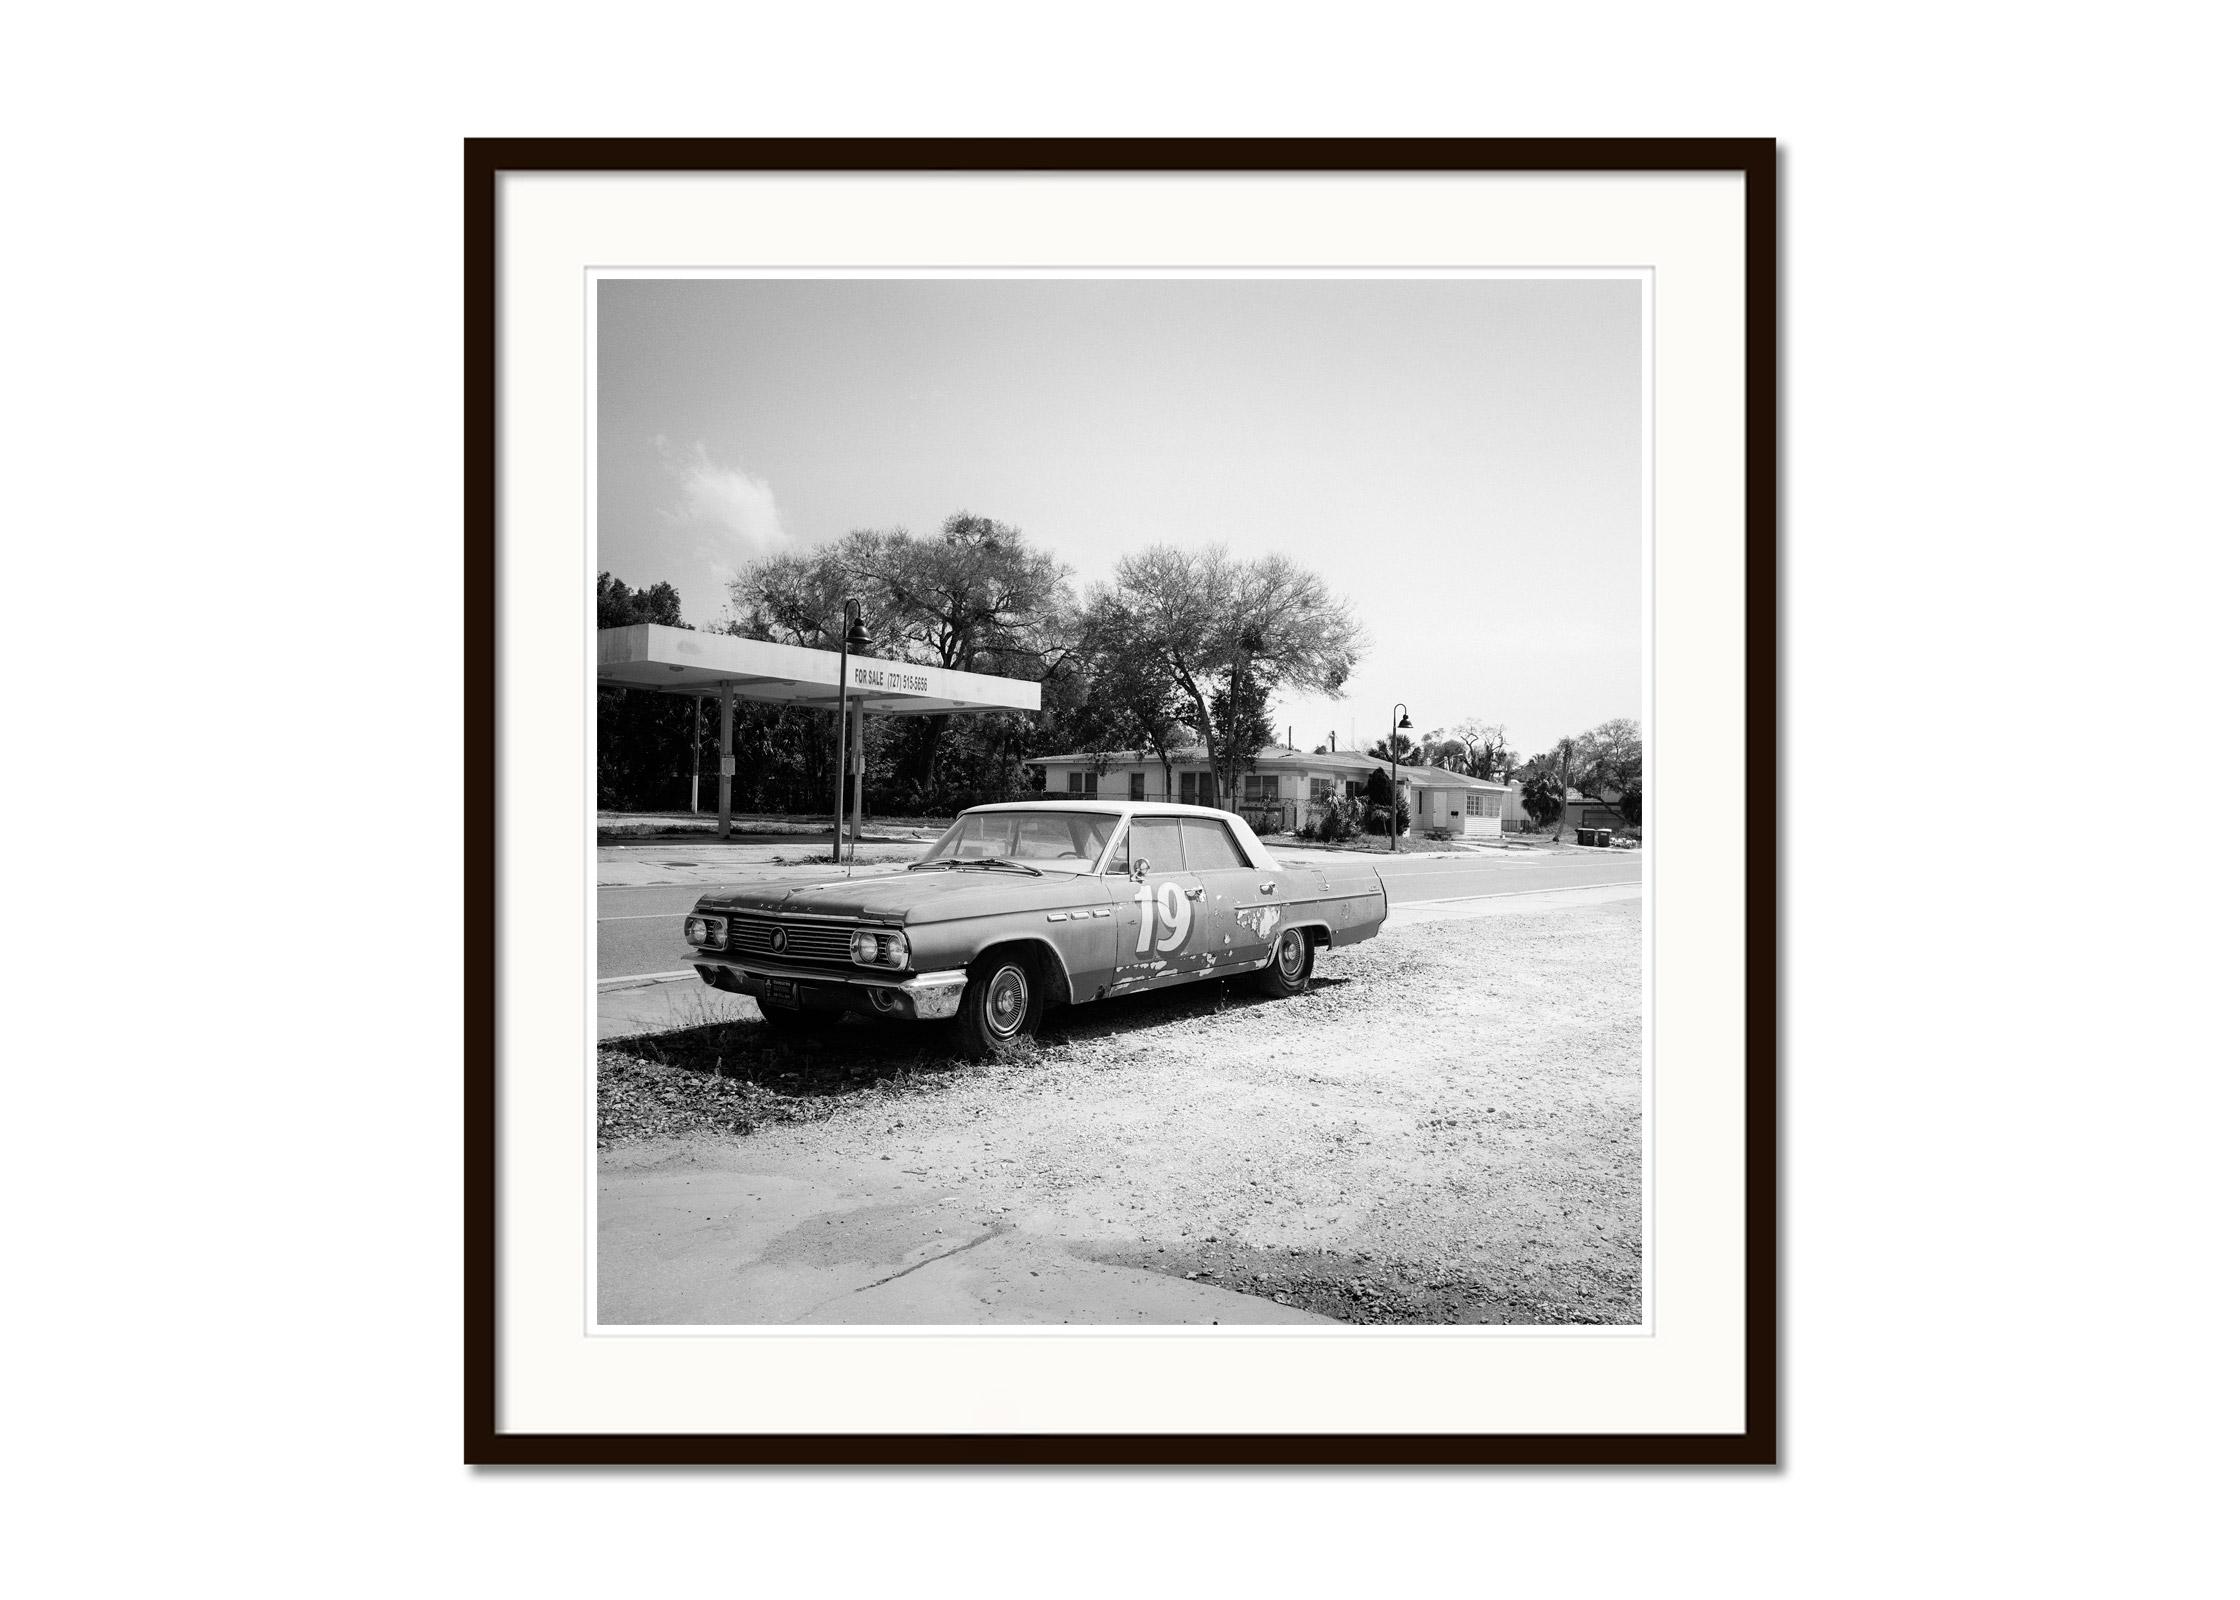 Buick for sale, classic car, Florida, USA, black and white landscape photography - Gray Landscape Photograph by Gerald Berghammer